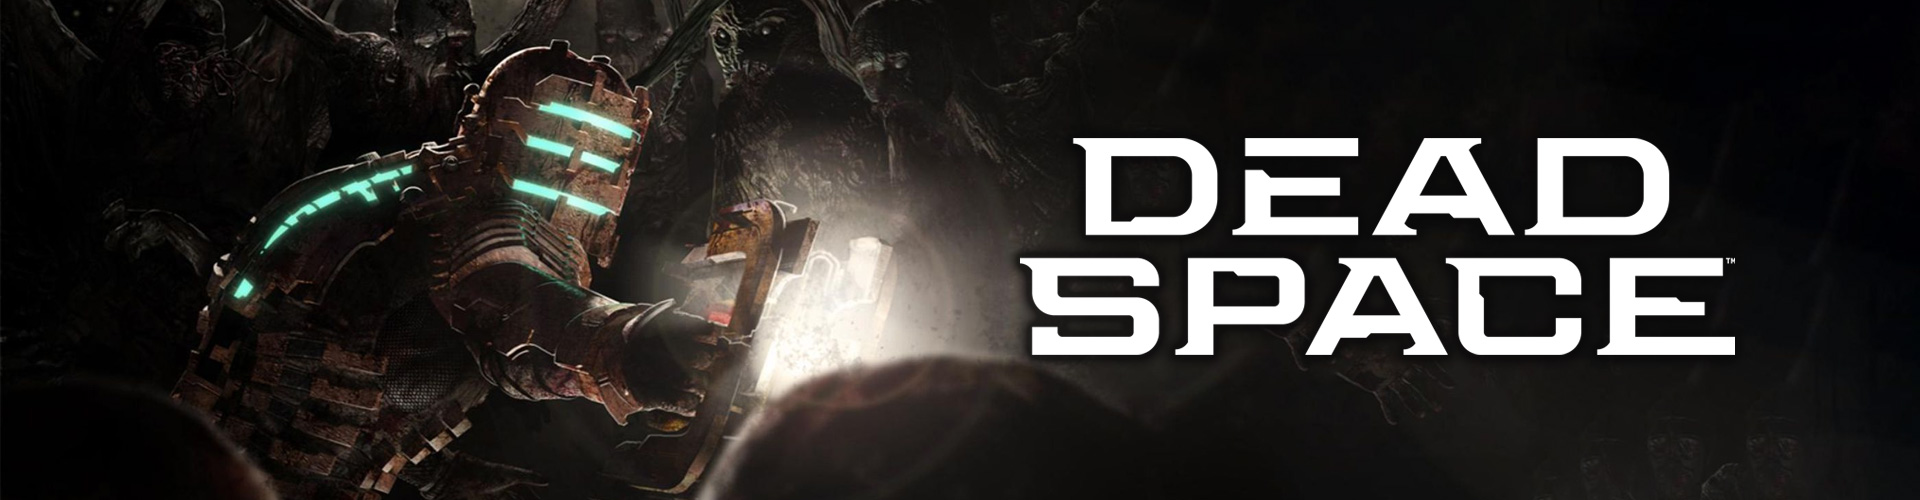 Dead Space is A third-person sci-fi survival horror game